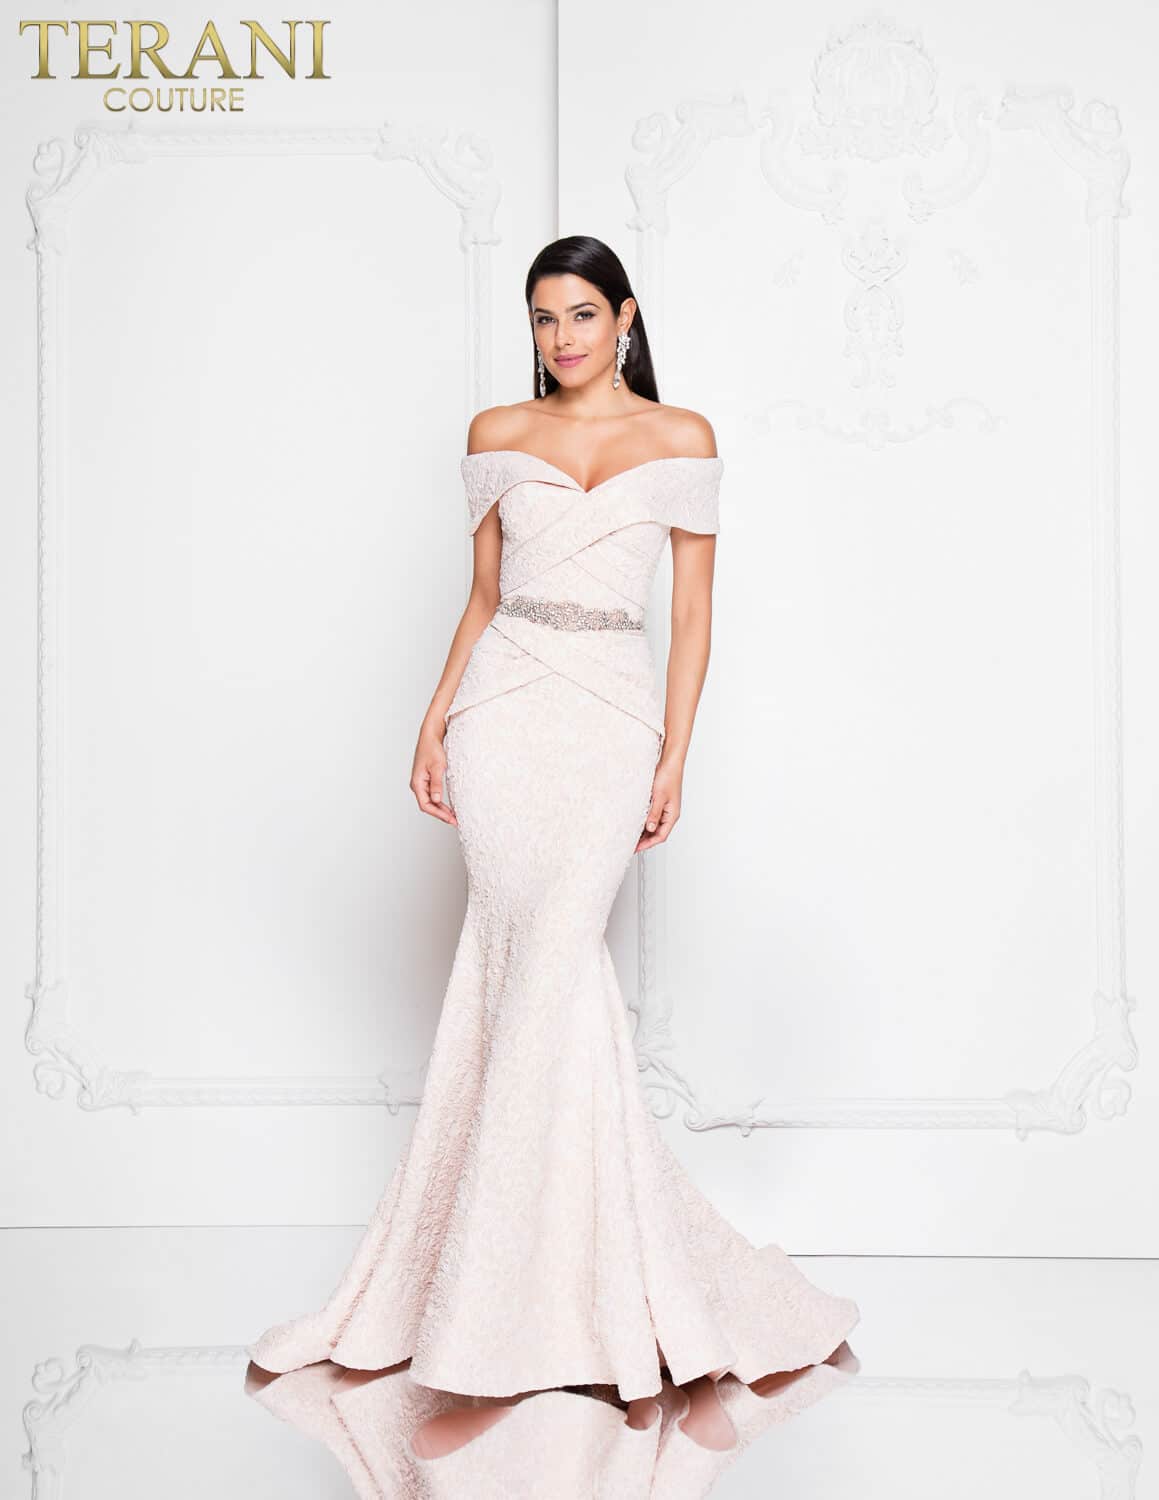 Terani Couture Wedding Evening Dress and Gowns Collection | Bridal ...